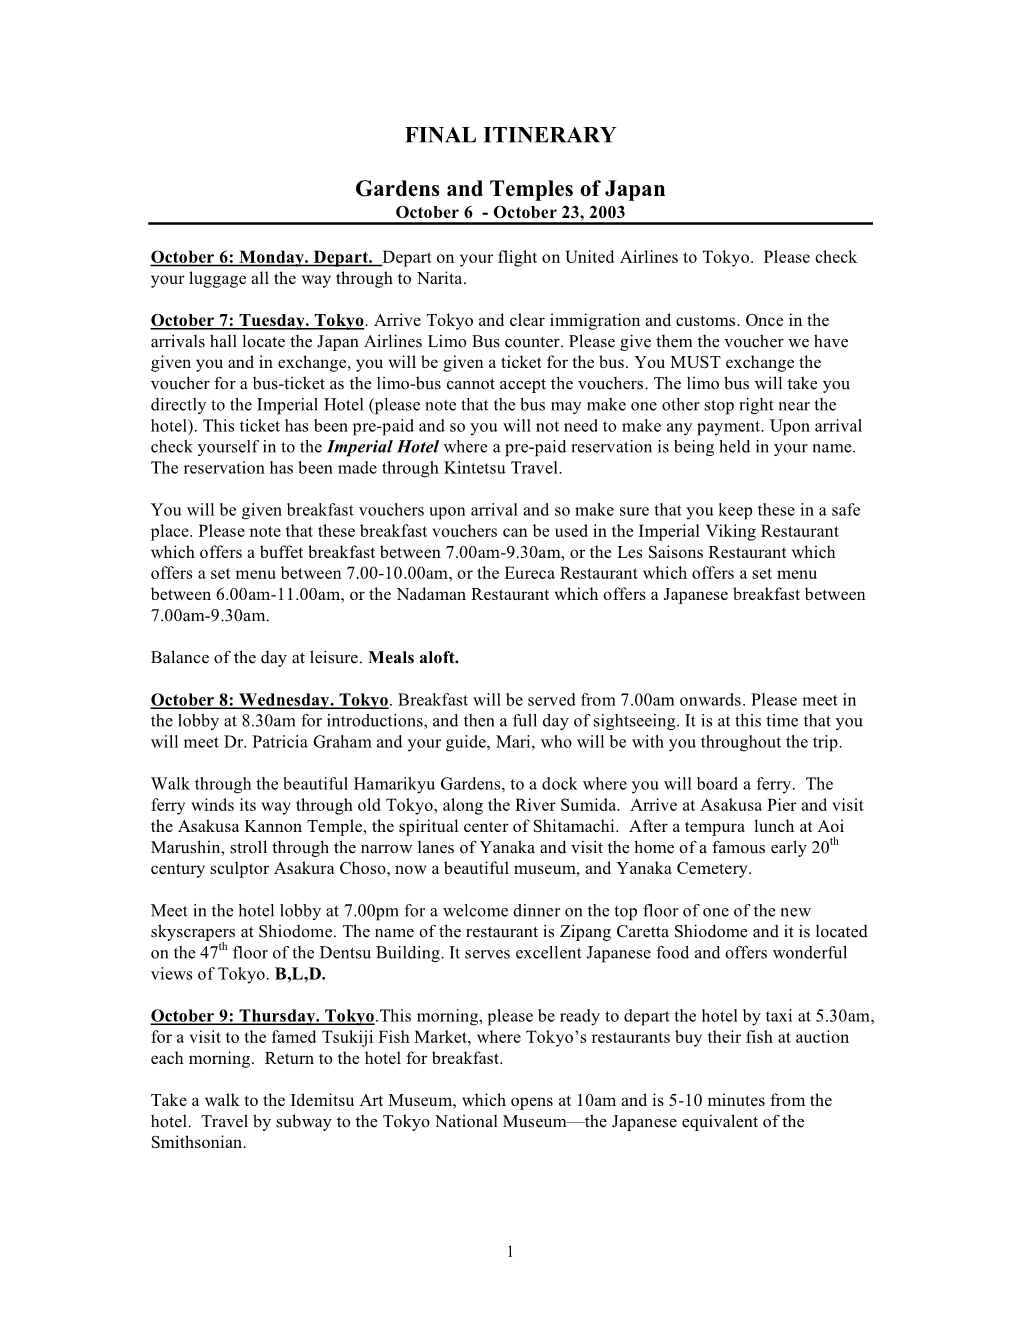 FINAL ITINERARY Gardens and Temples of Japan